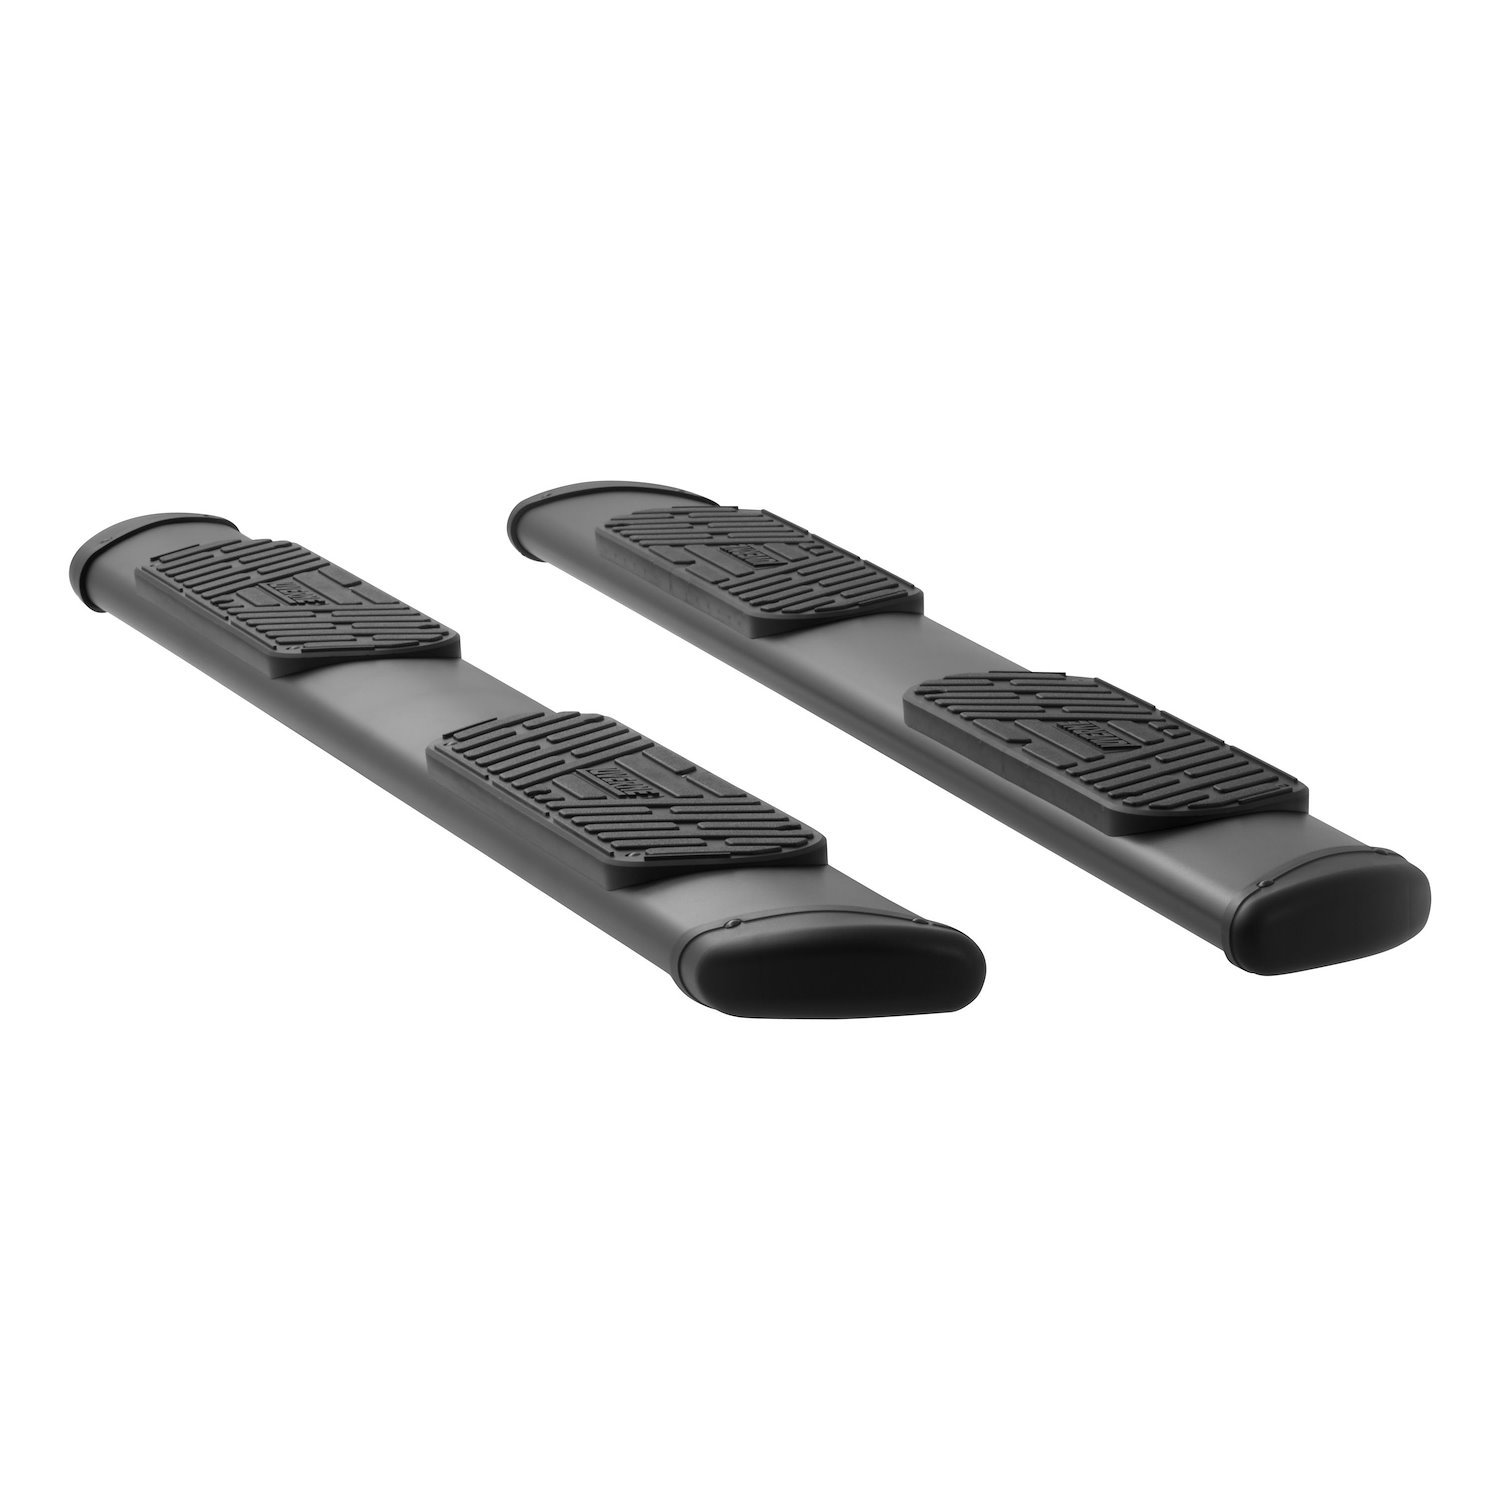 277088-401445 Regal 7 Black Stainless 88 in. Oval Side Steps Fits Select Chevy Silverado, GMC Sierra Crew Cab